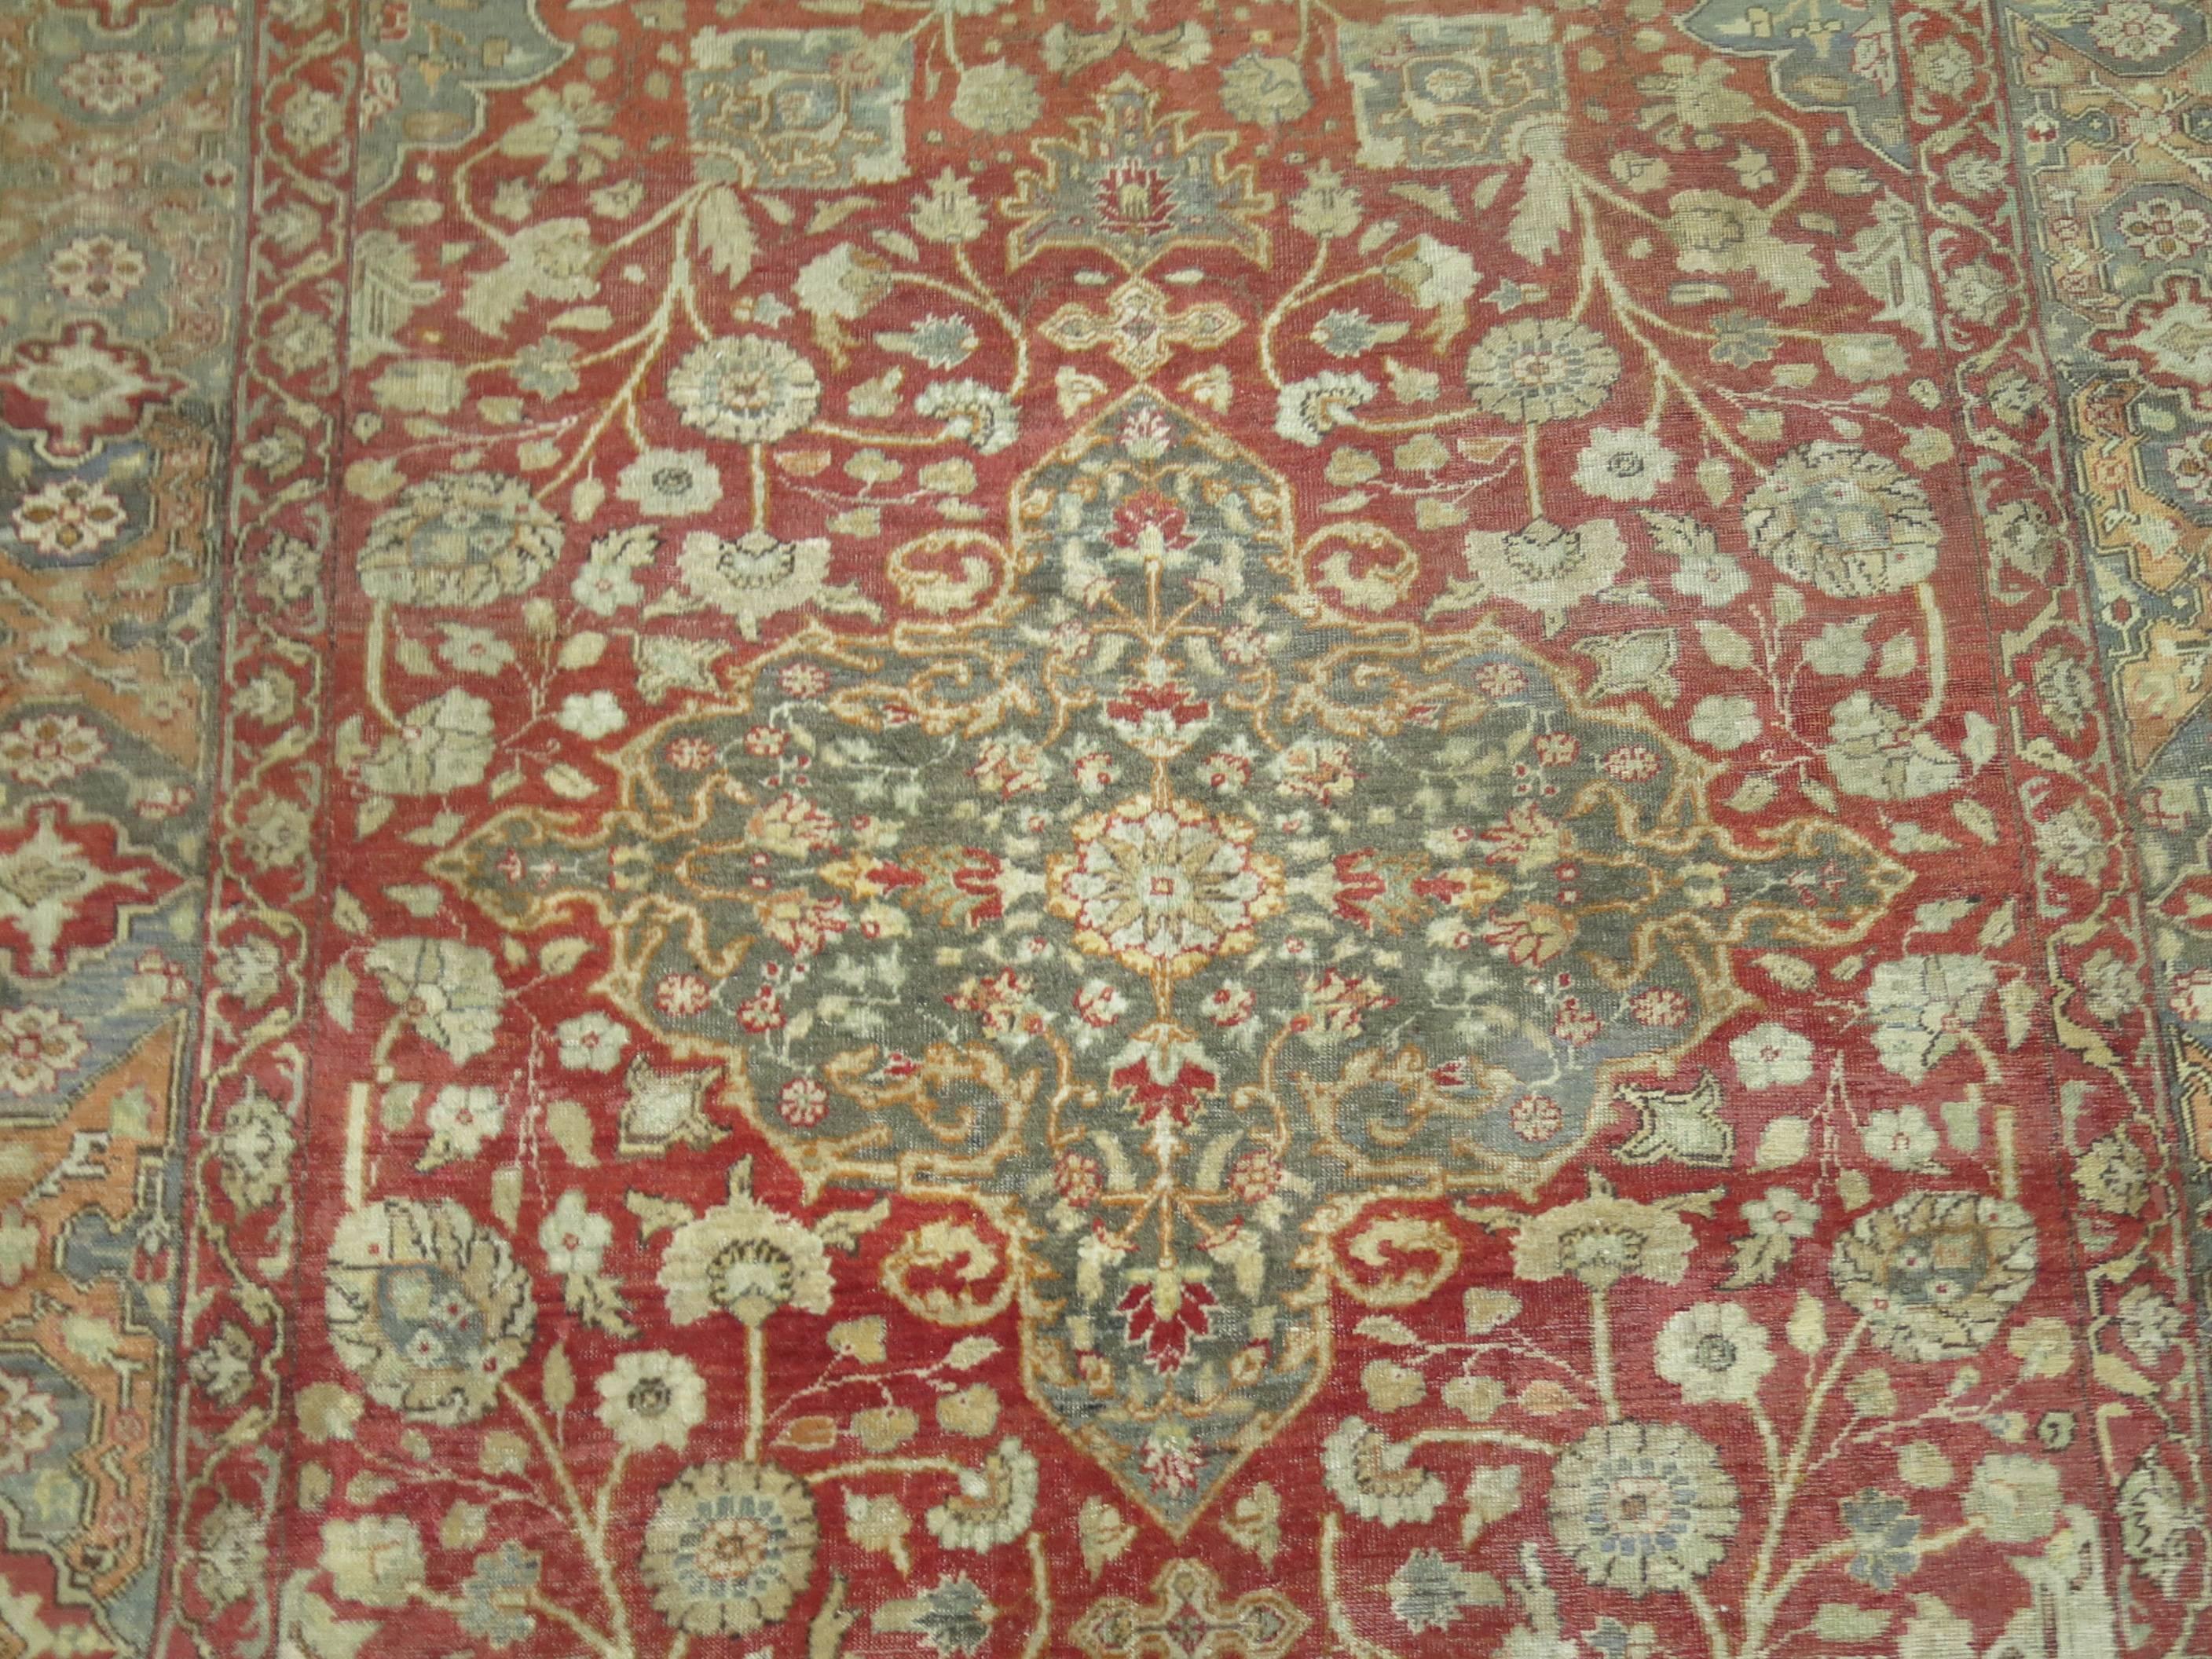 Finely woven Turkish Sivas carpet with Classic medallion and border, predominant color accents in gray and red. Measures: 6'7” x 9'7”.